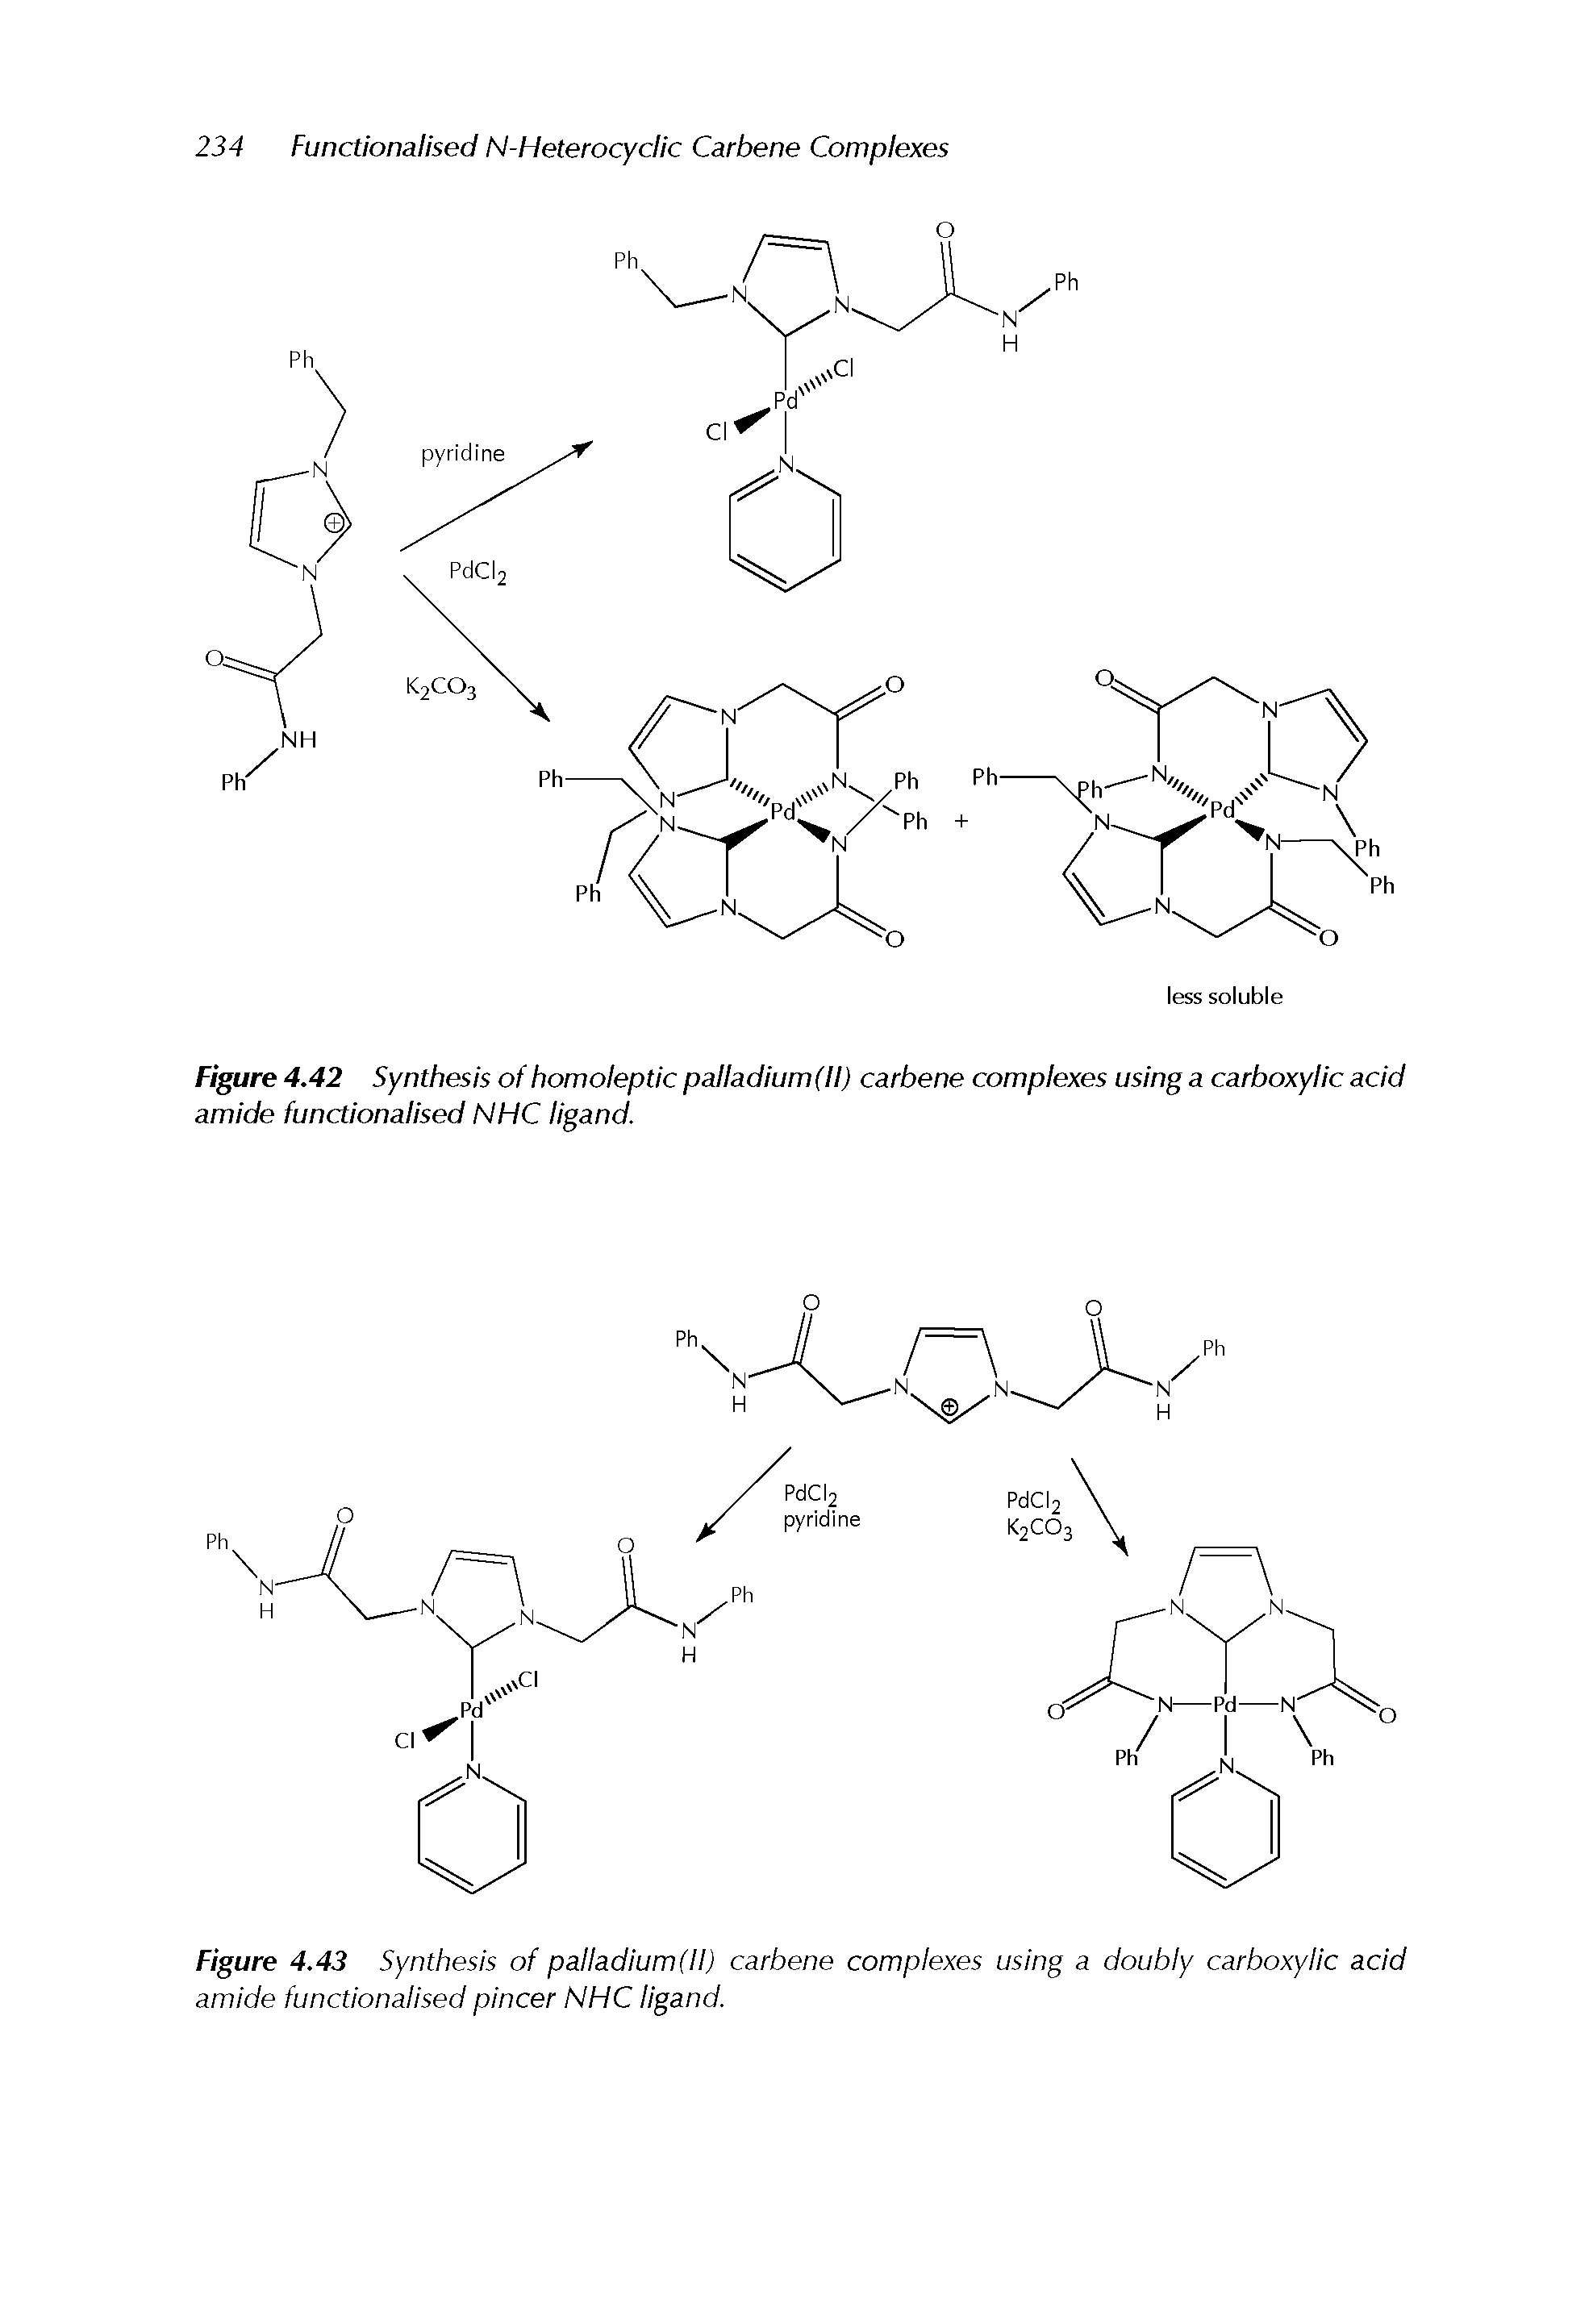 Figure 4.42 Synthesis of homoleptic palladium(ll) carbene complexes using a carboxylic acid amide functionalised NHC ligand.